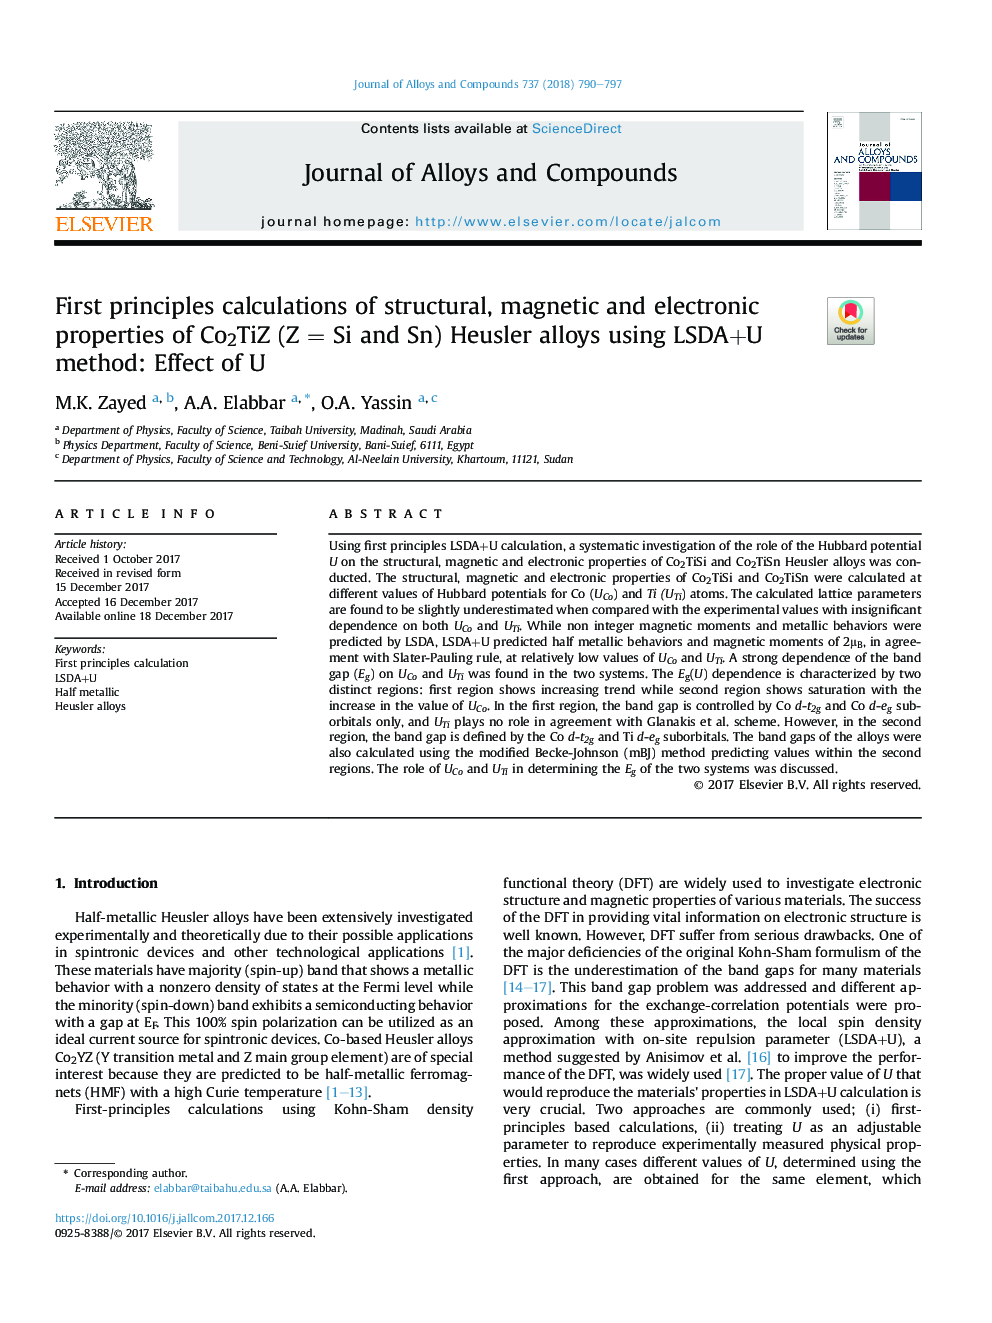 First principles calculations of structural, magnetic and electronic properties of Co2TiZ (ZÂ = Si and Sn) Heusler alloys using LSDA+U method: Effect of U